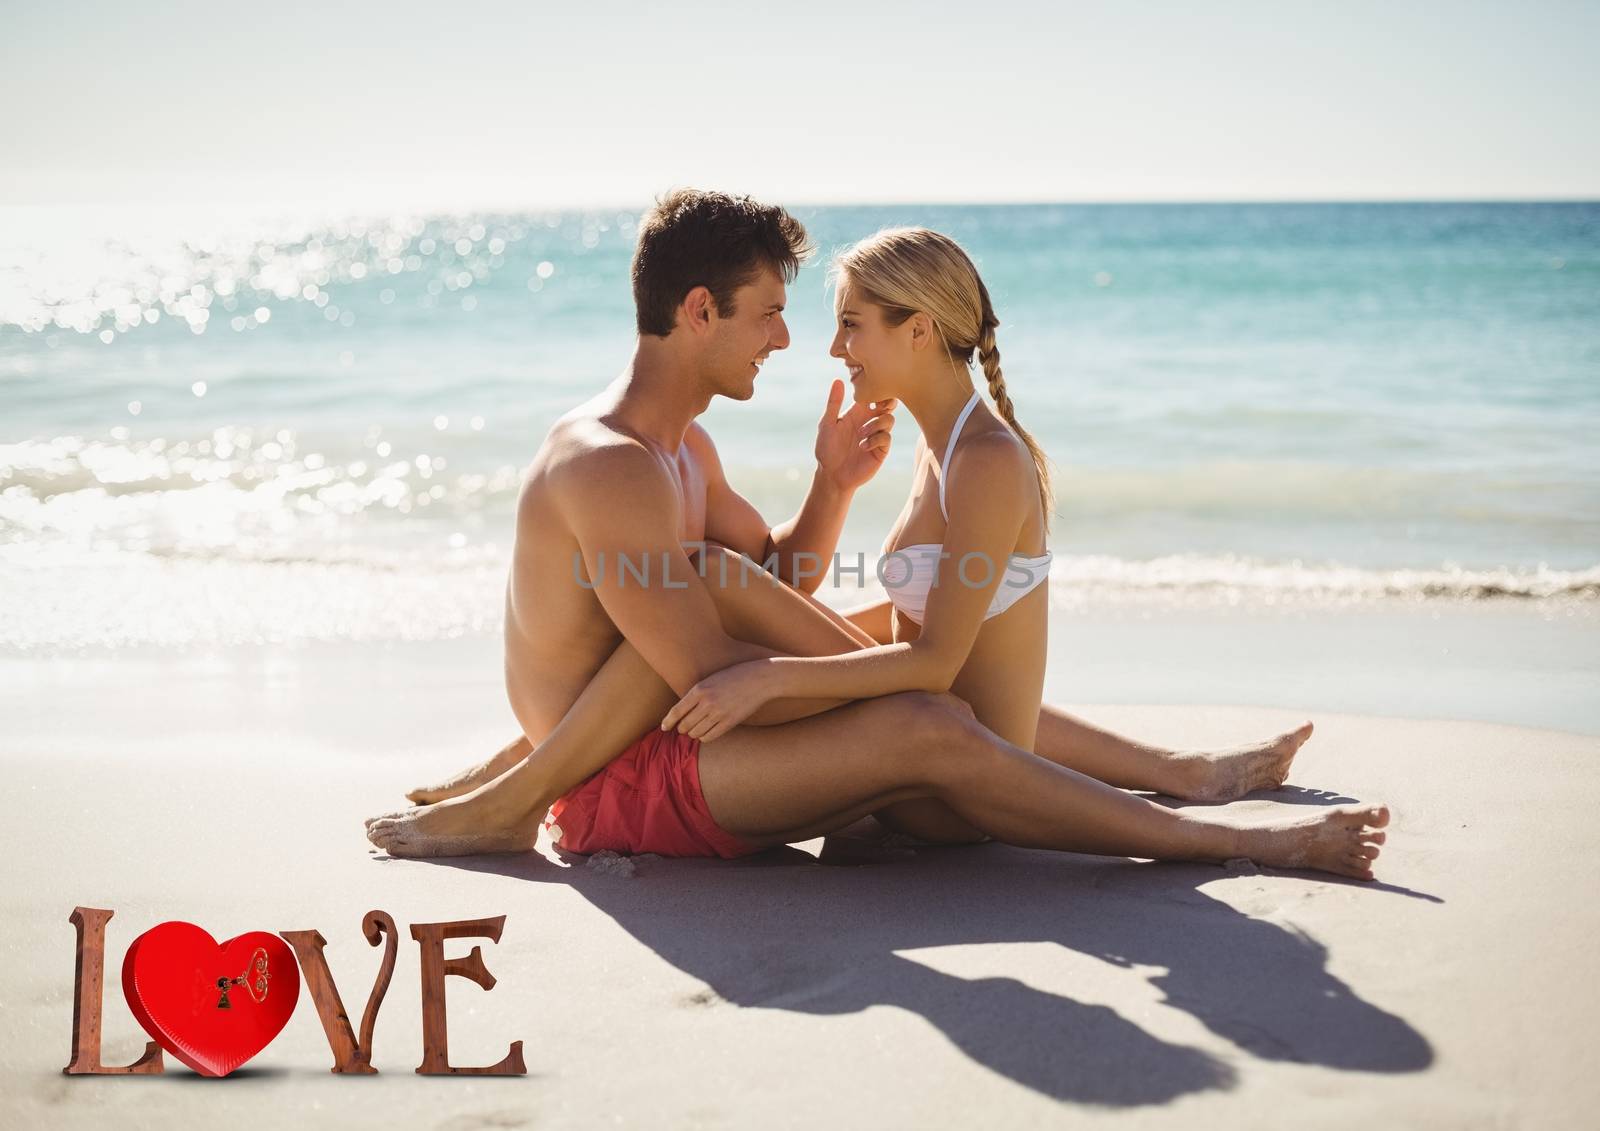 Composite of romantic couple sitting on beach with text love in foreground